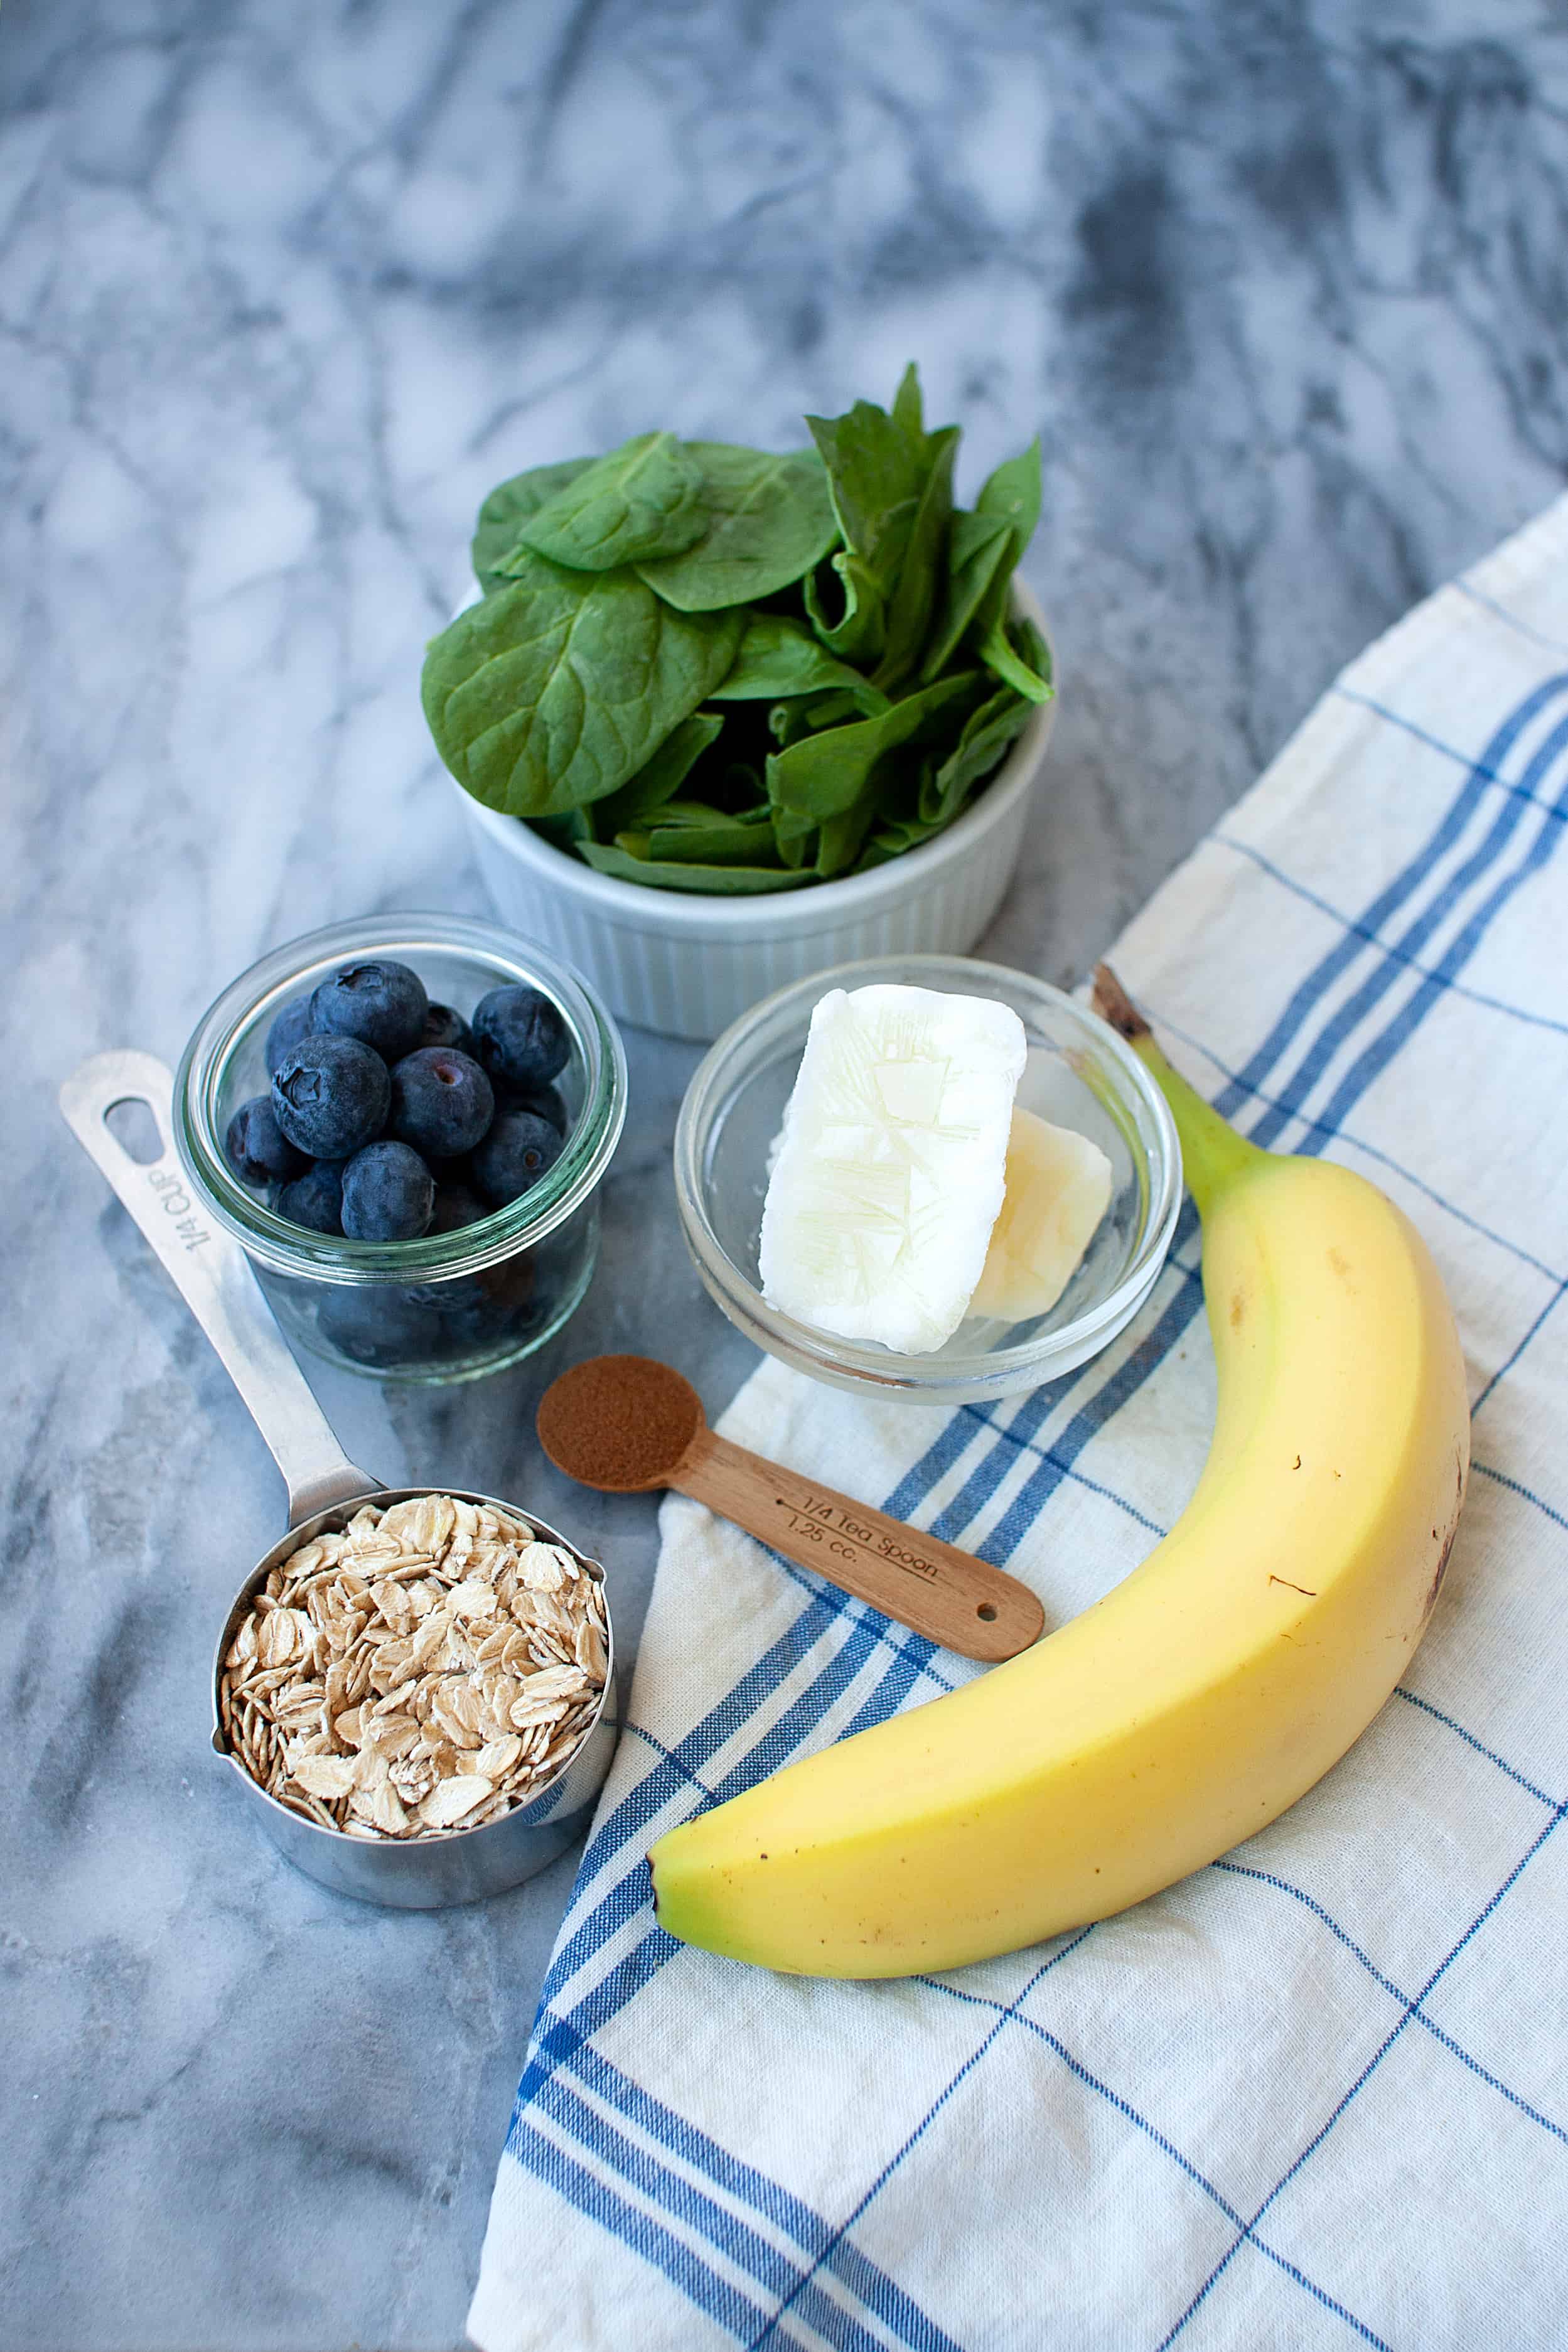 Blueberry Oatmeal Spinach Smoothie Ingredients